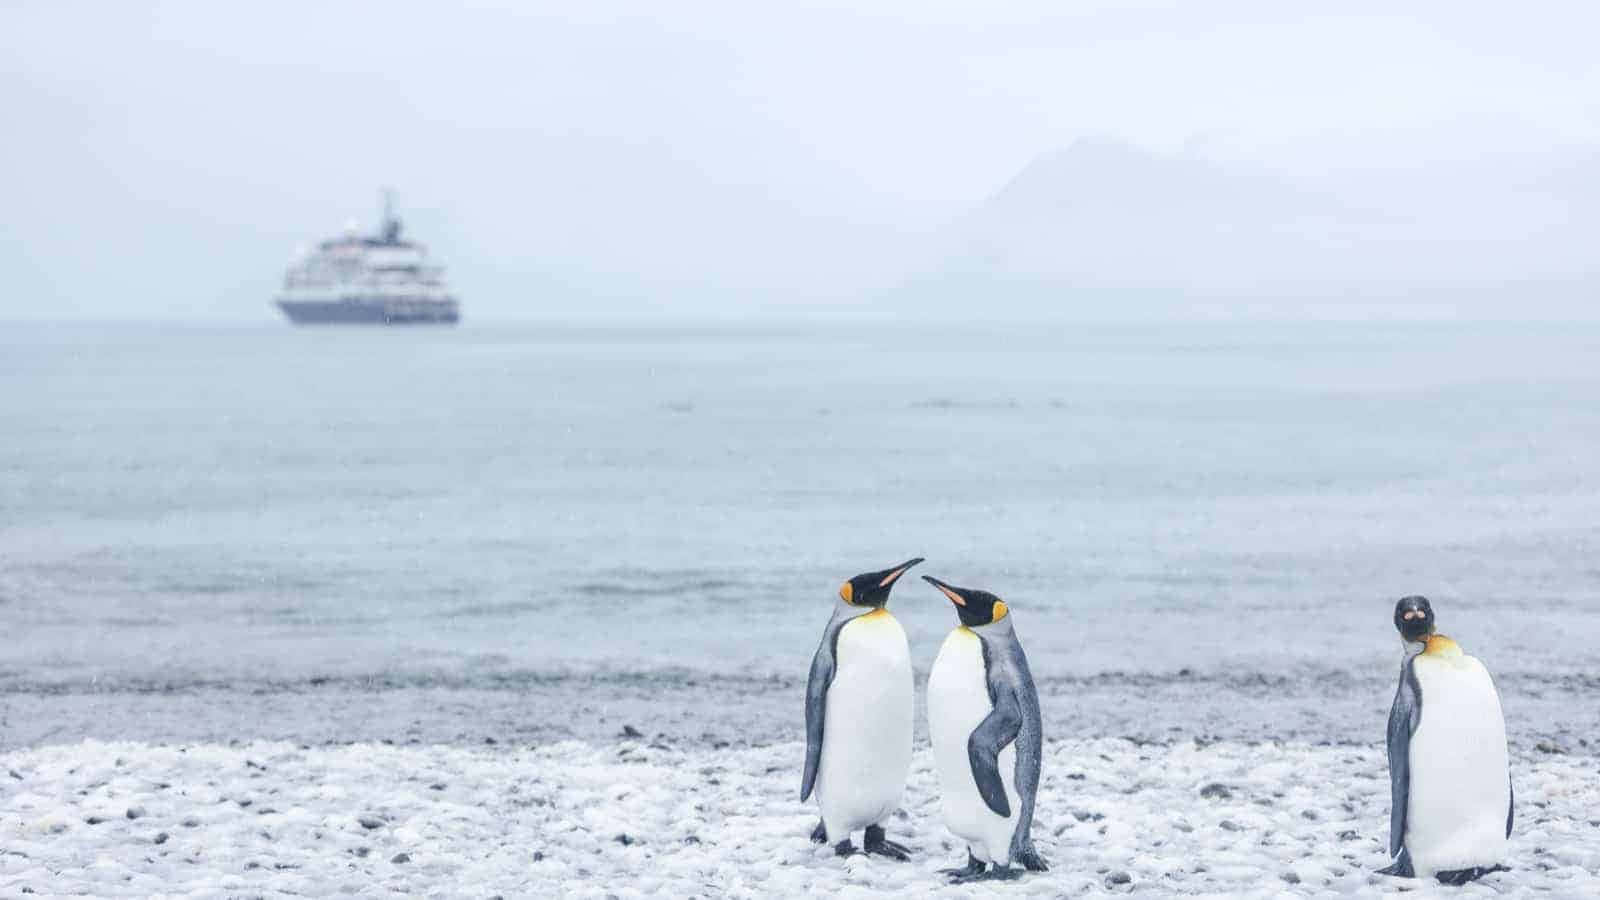 Experiencing the amazing beauty of Antarctica